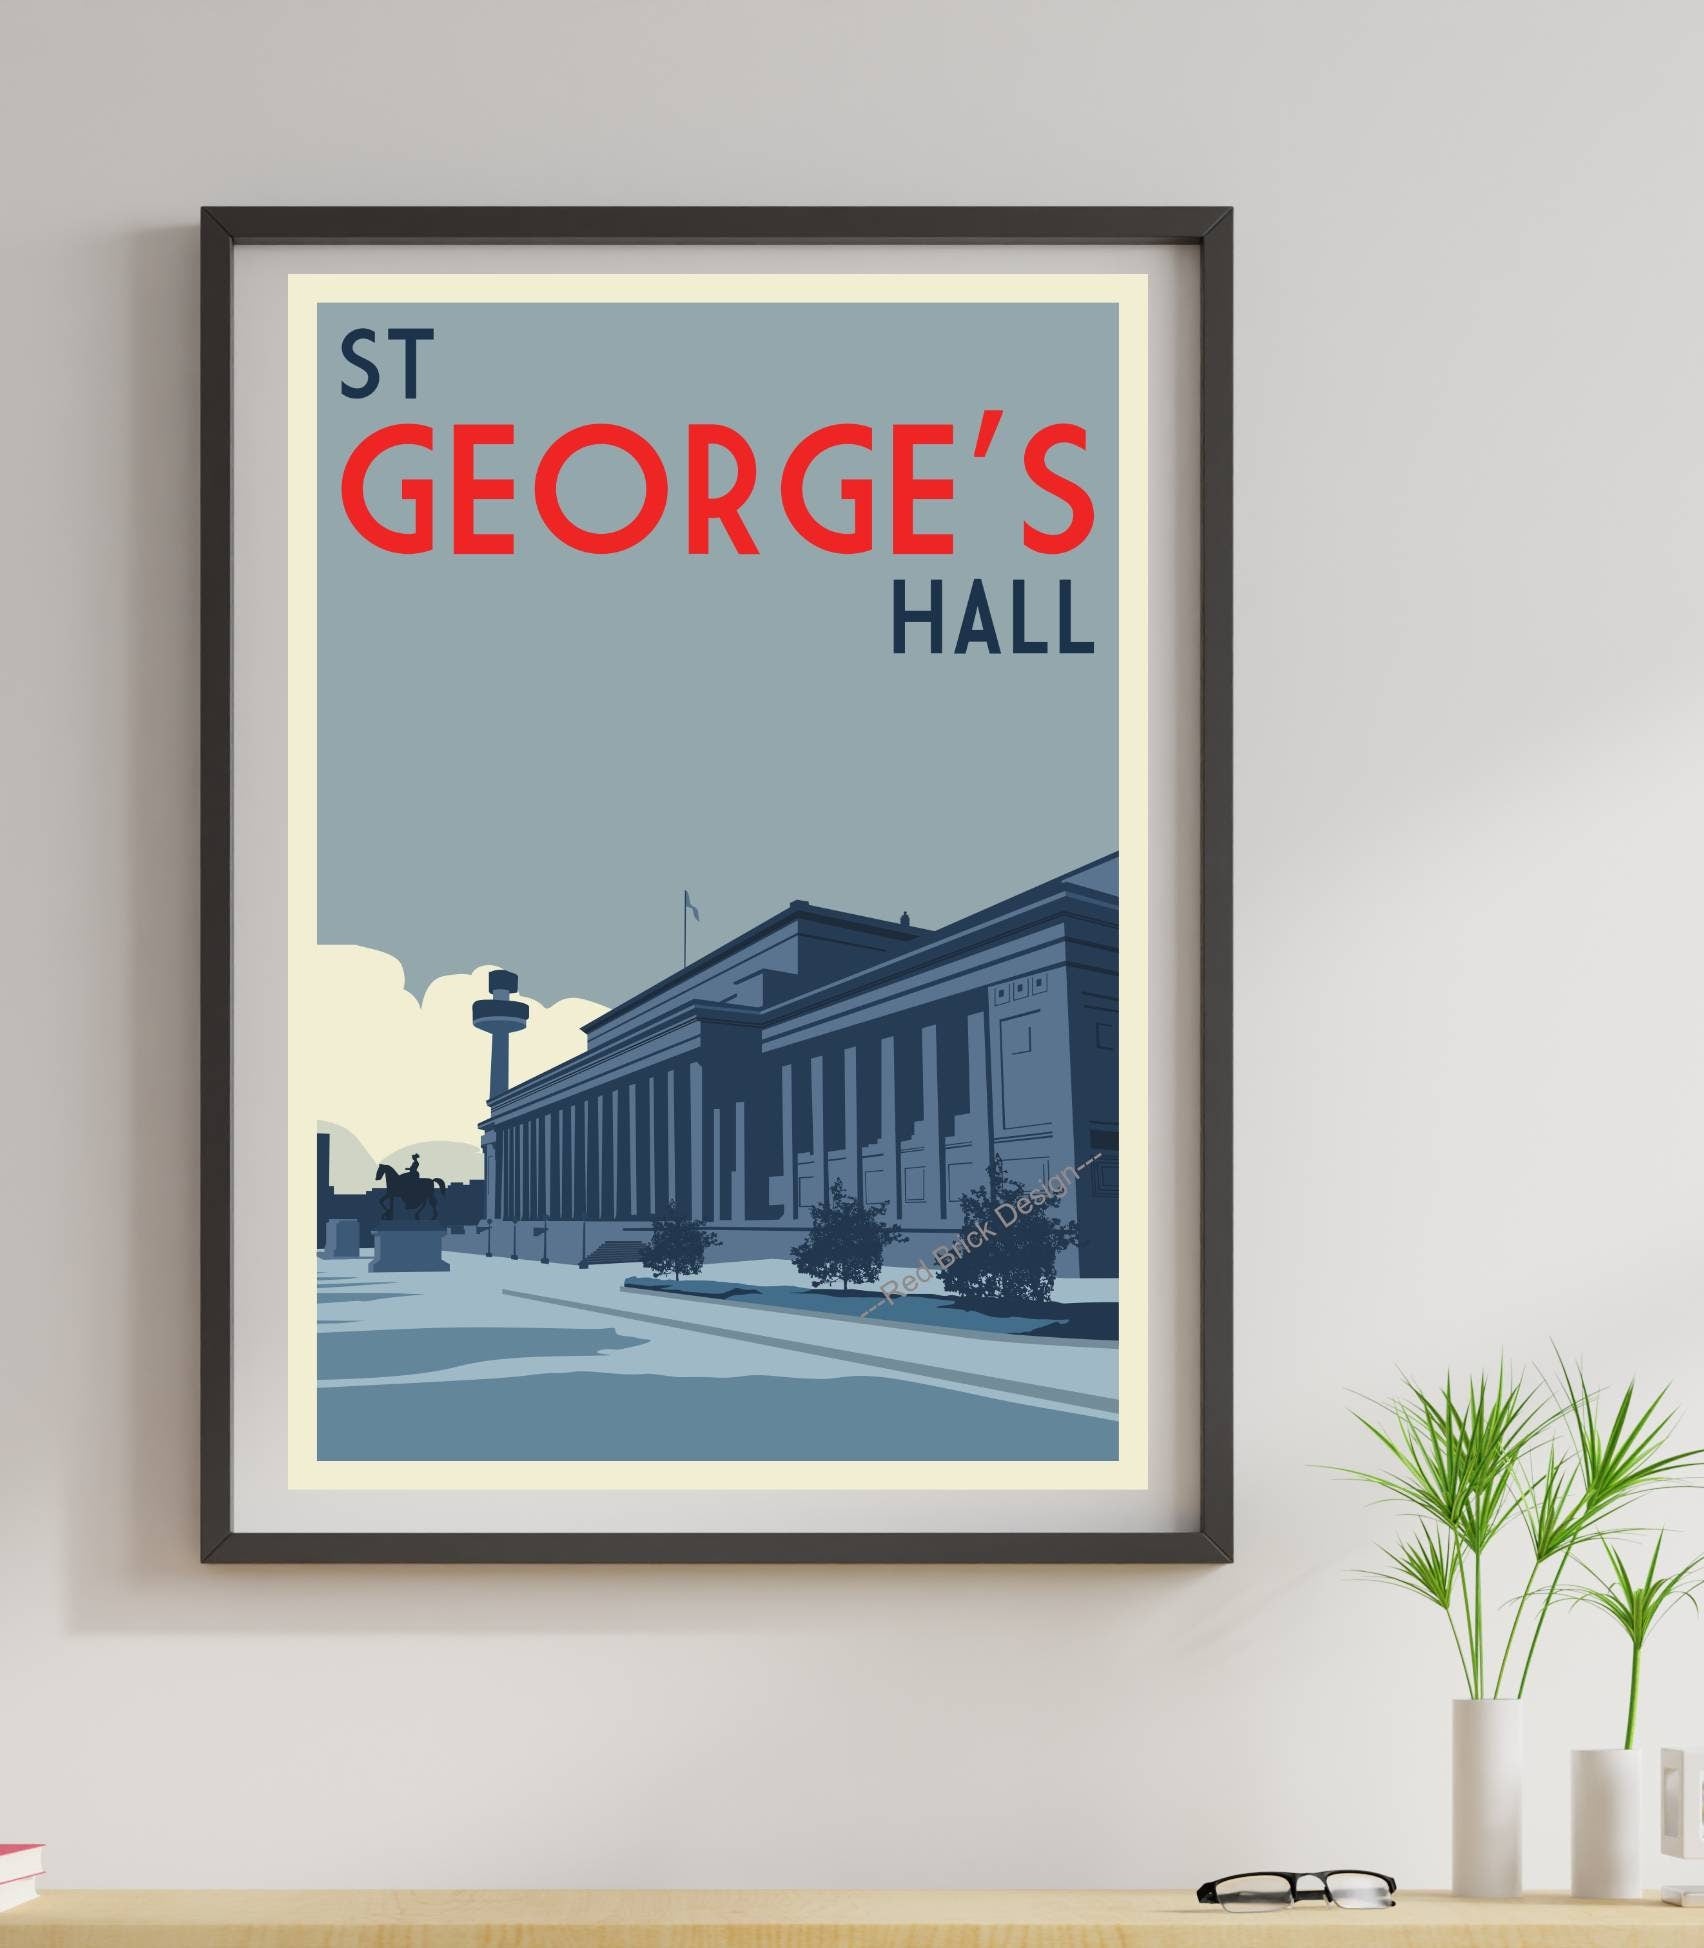 Three Graces Liverpool waterfront poster